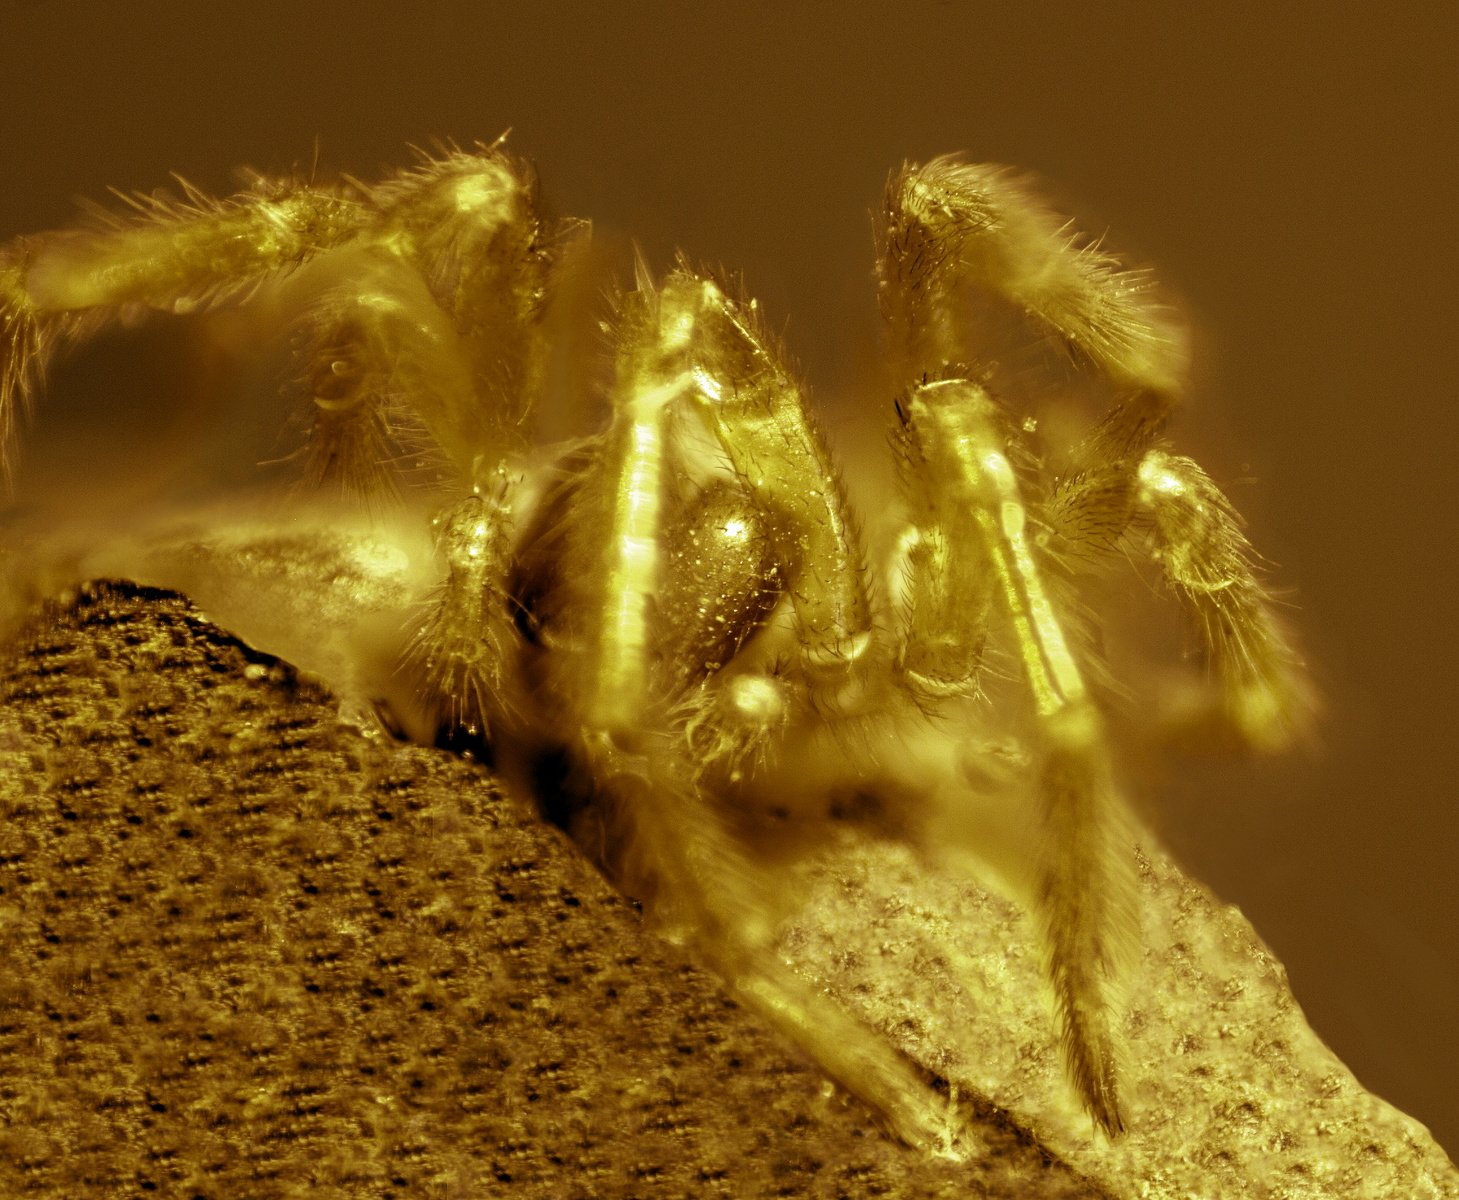 the yellow spider is shown, glowing from below